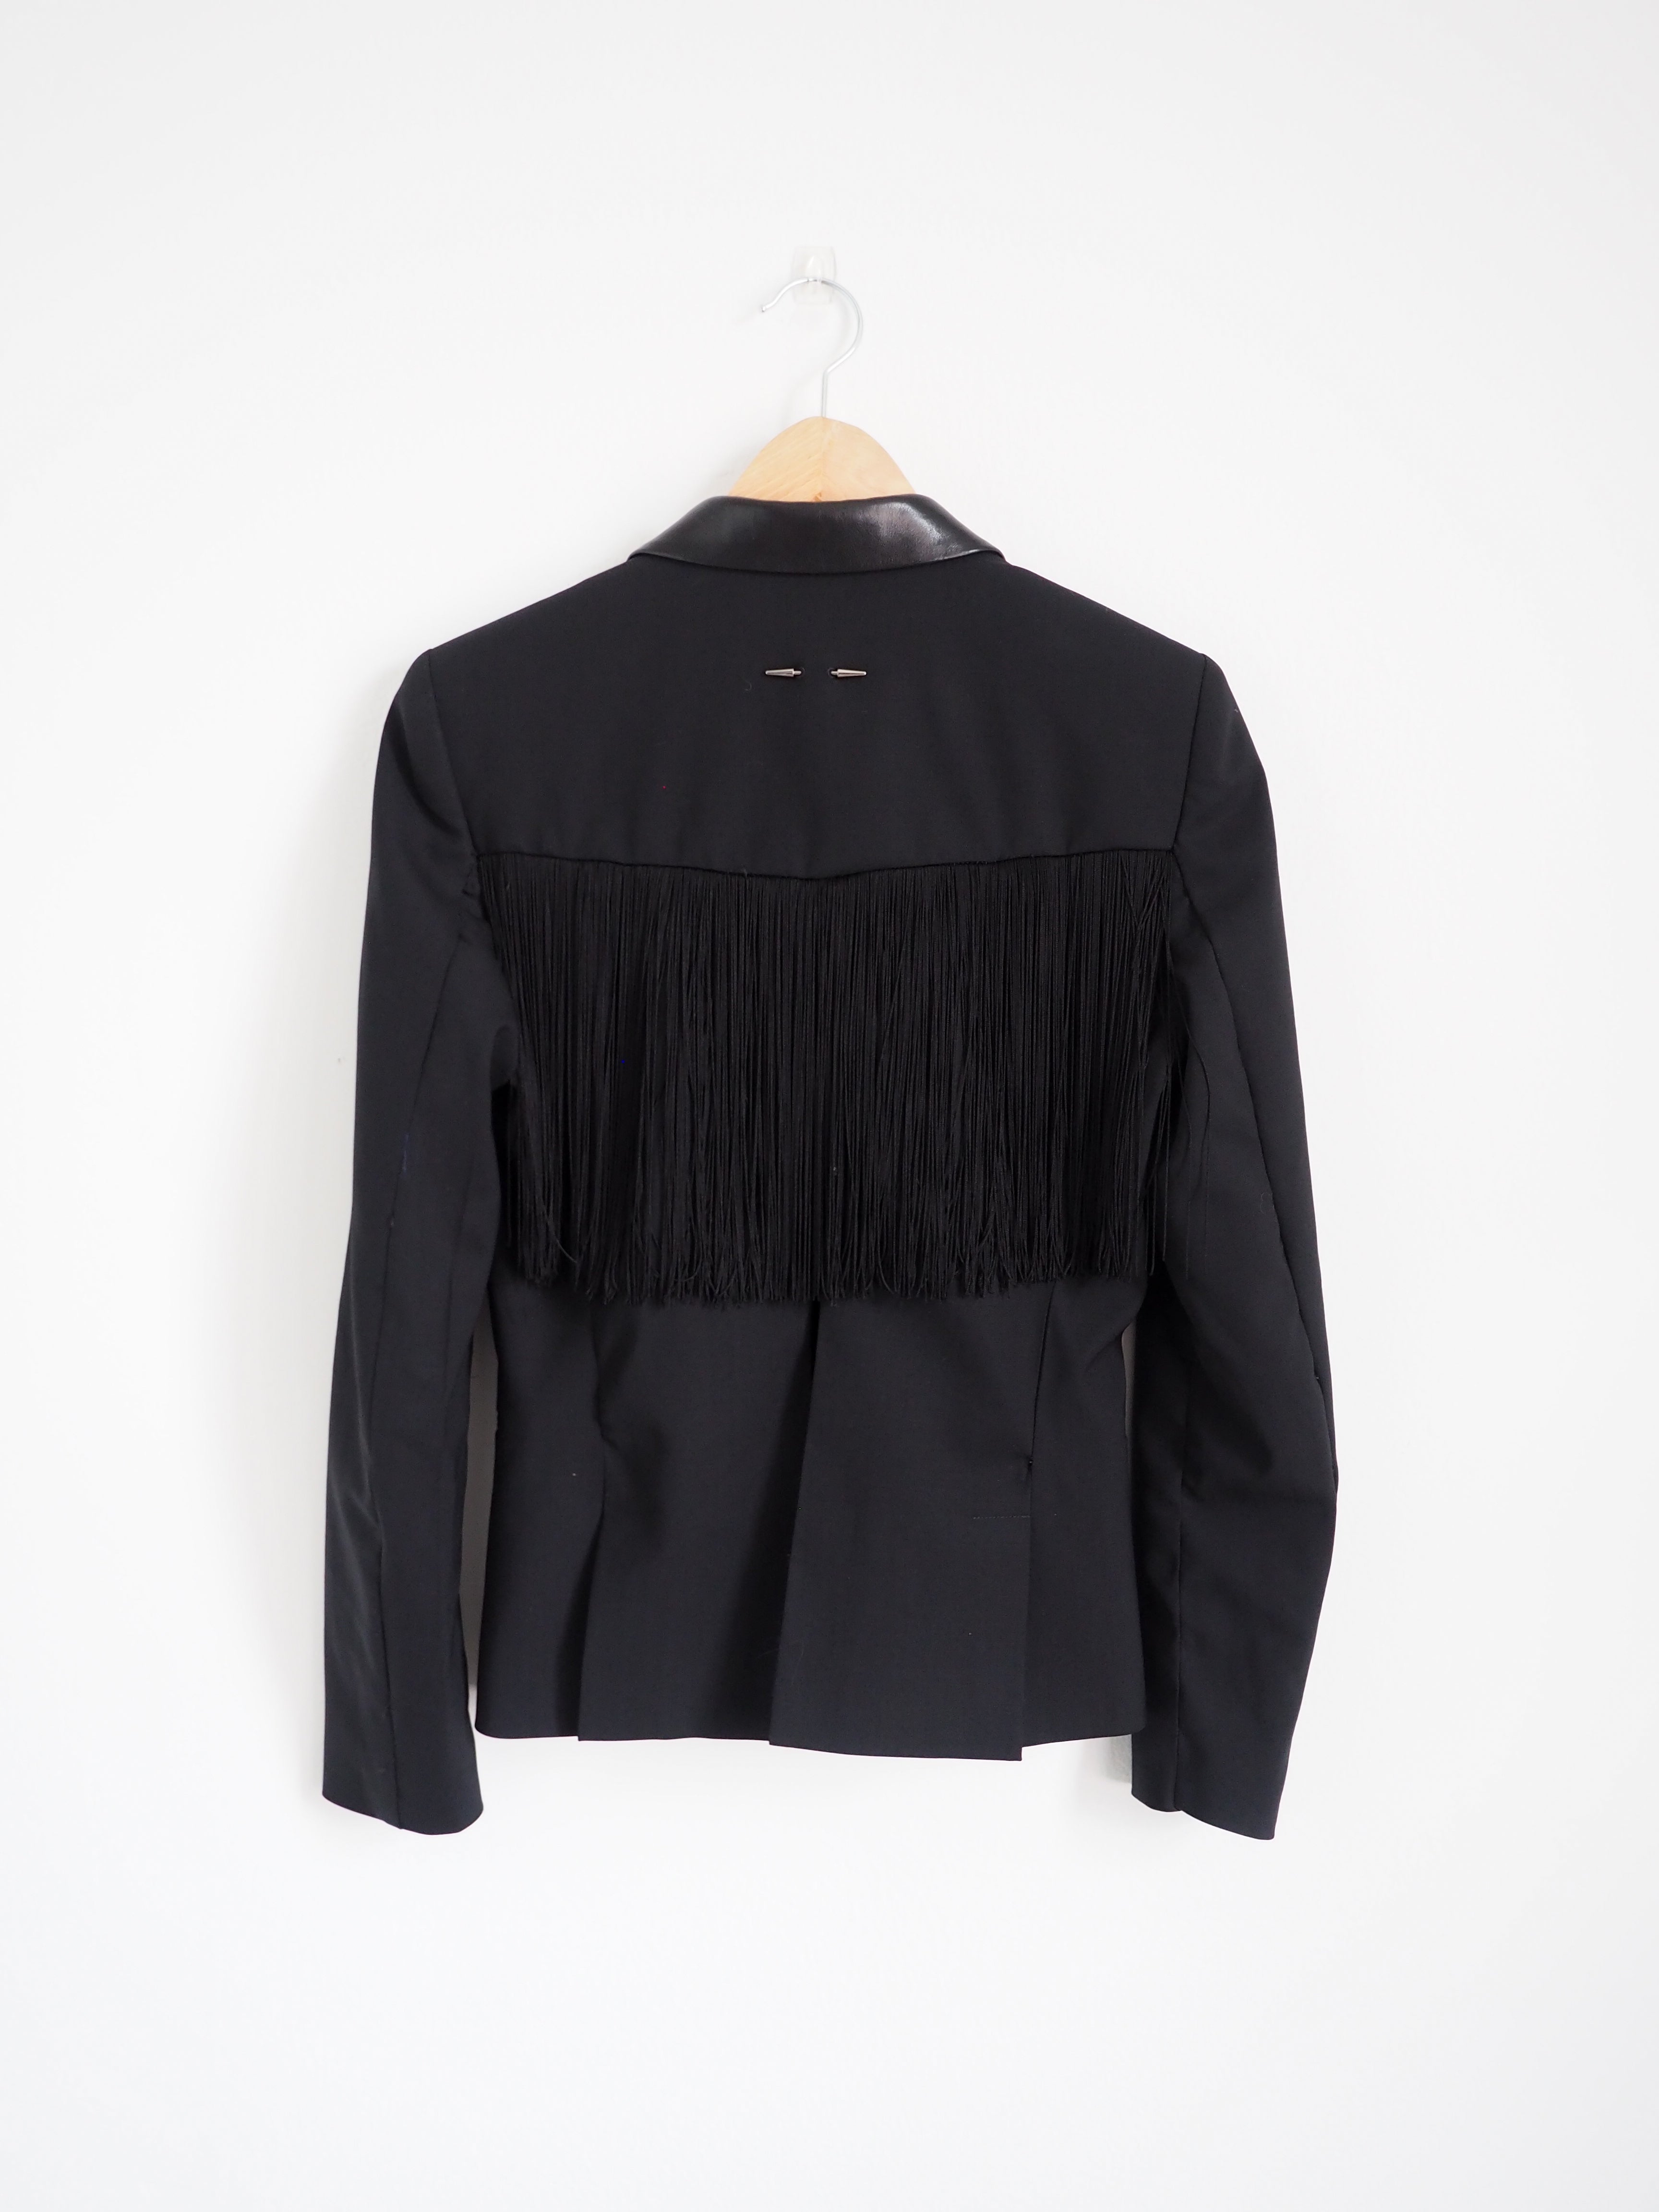 Pre-Owned Reworked Barbara Bui Wool & Leather Fringe Blazer (S)